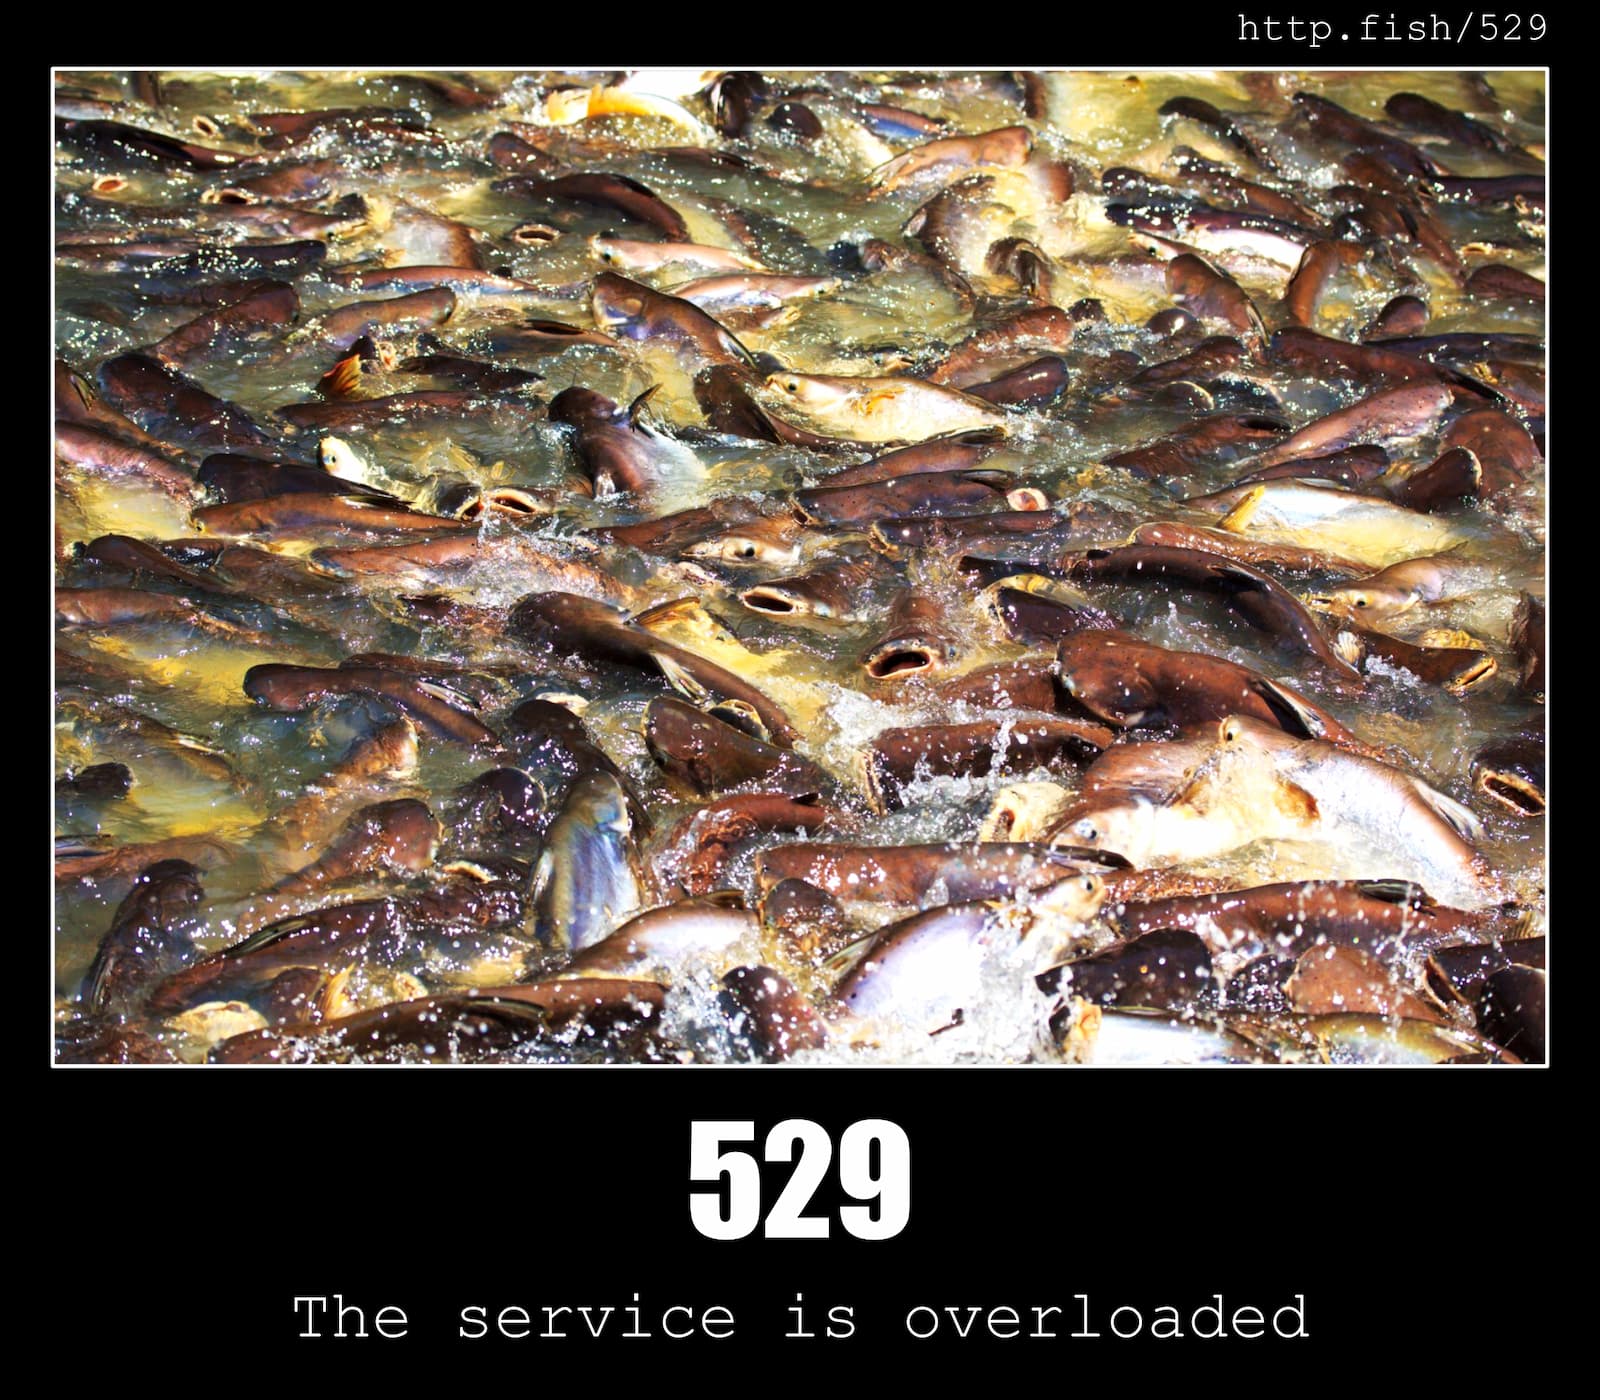 HTTP Status Code 529 The service is overloaded & Fish